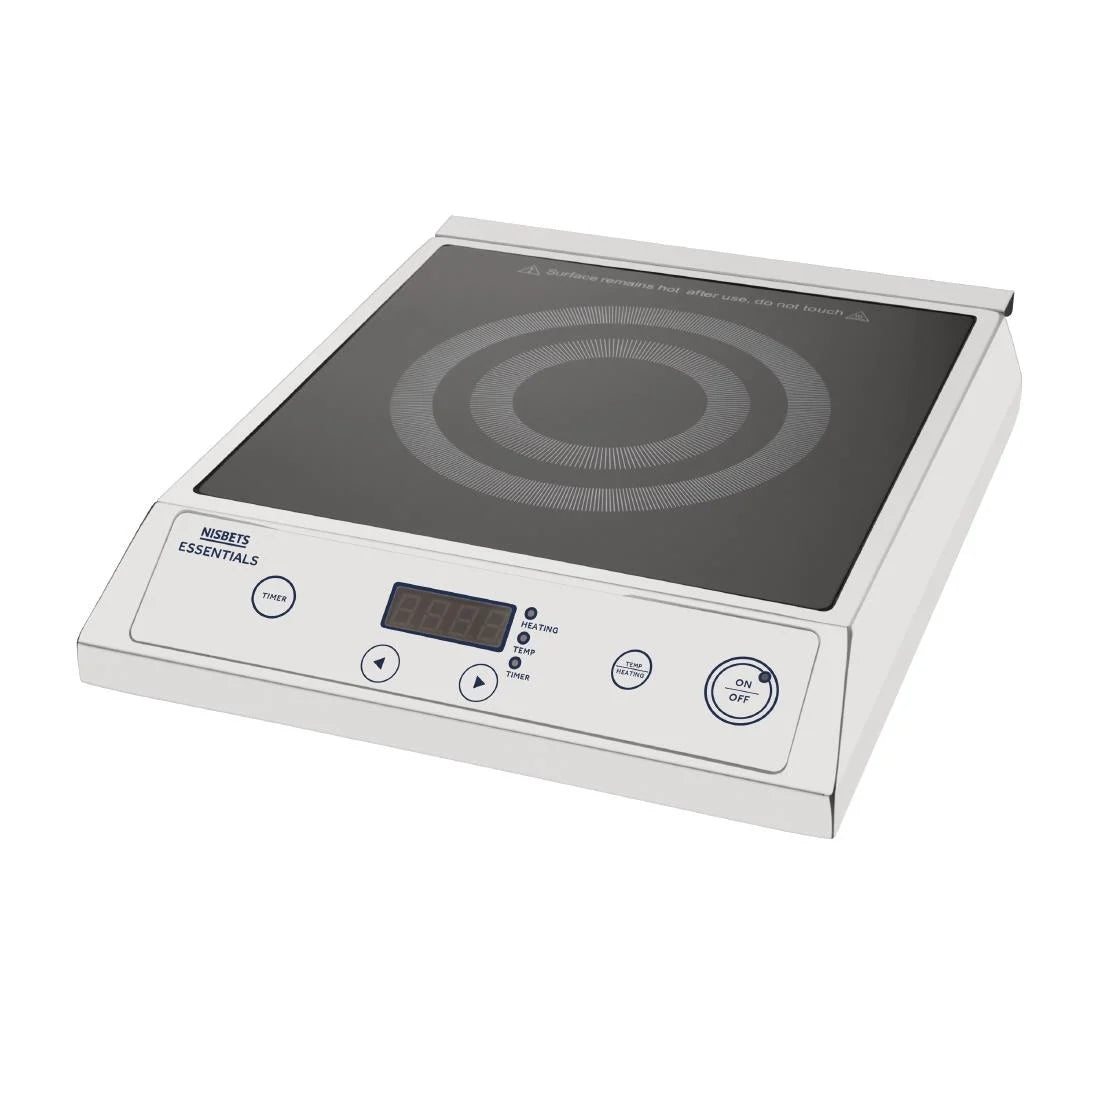 Nisbets Essentials Single Induction Hob 2.7kW.Product Ref:00707.Model:DA610. 🚚 3-5 Days Delivery